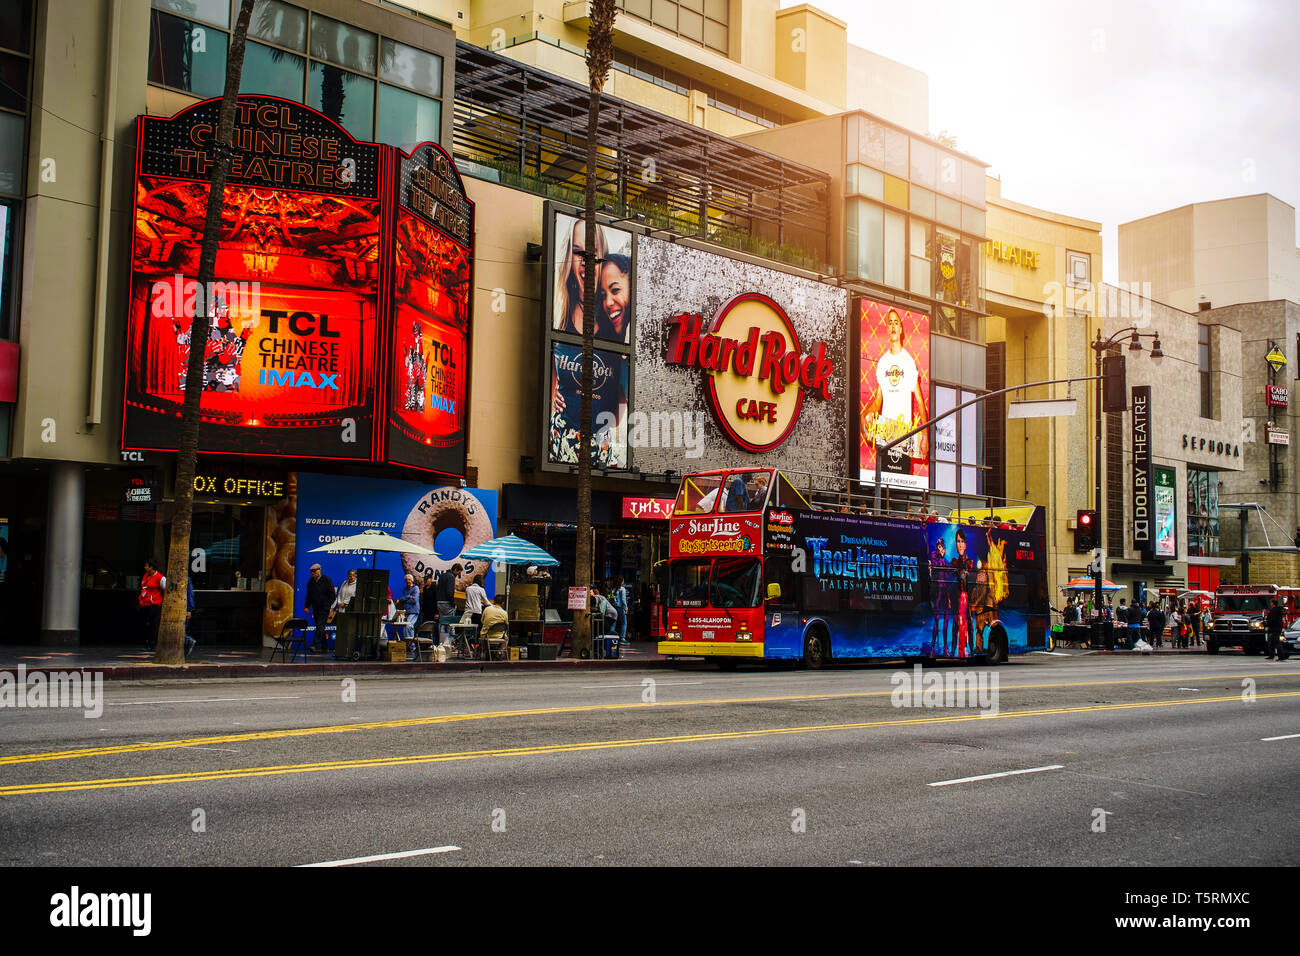 LOS ANGELES, USA - MAY 21, 2018: Doubledecker on Hollywood Boulevard, Hard Rock Cafe building Stock Photo